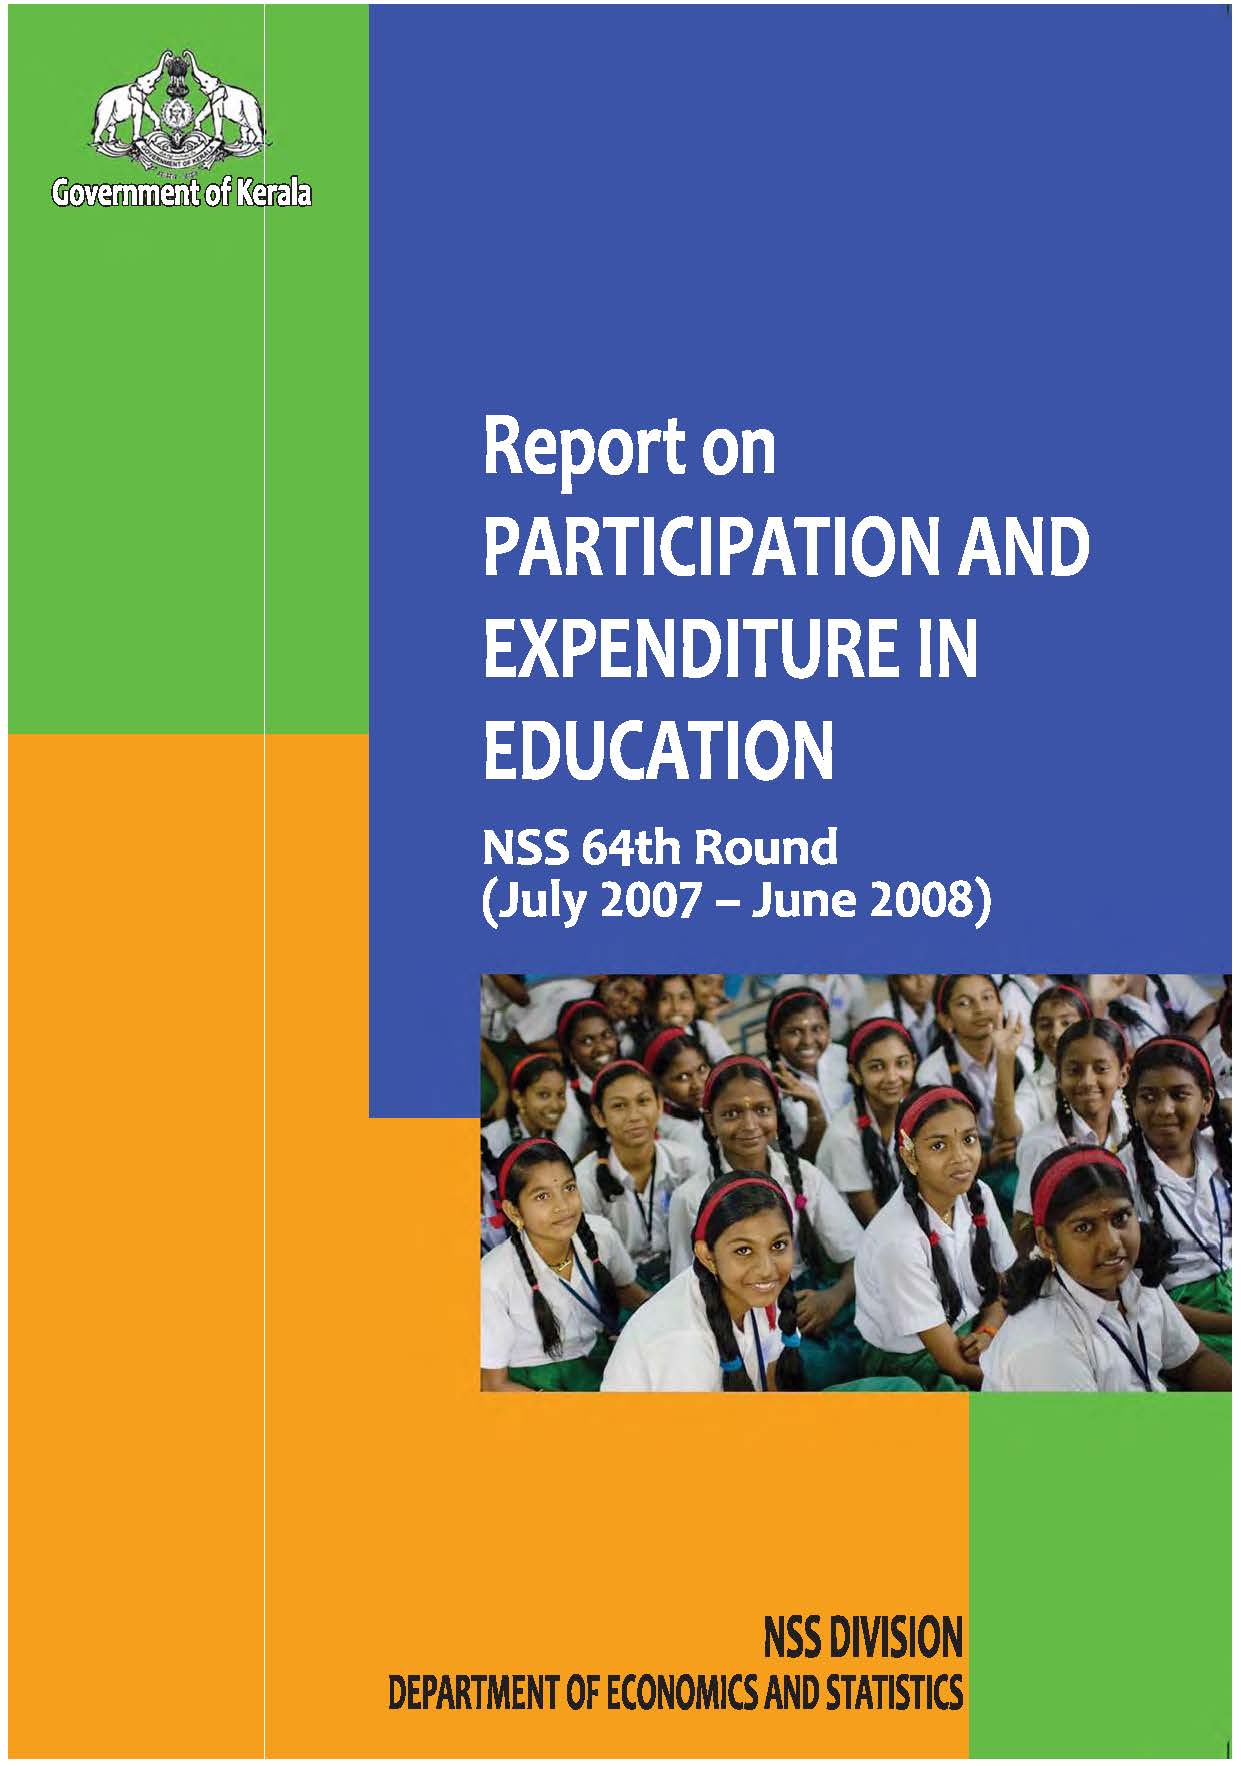 NSS 65th round - Report on Participation and Expenditure in Education